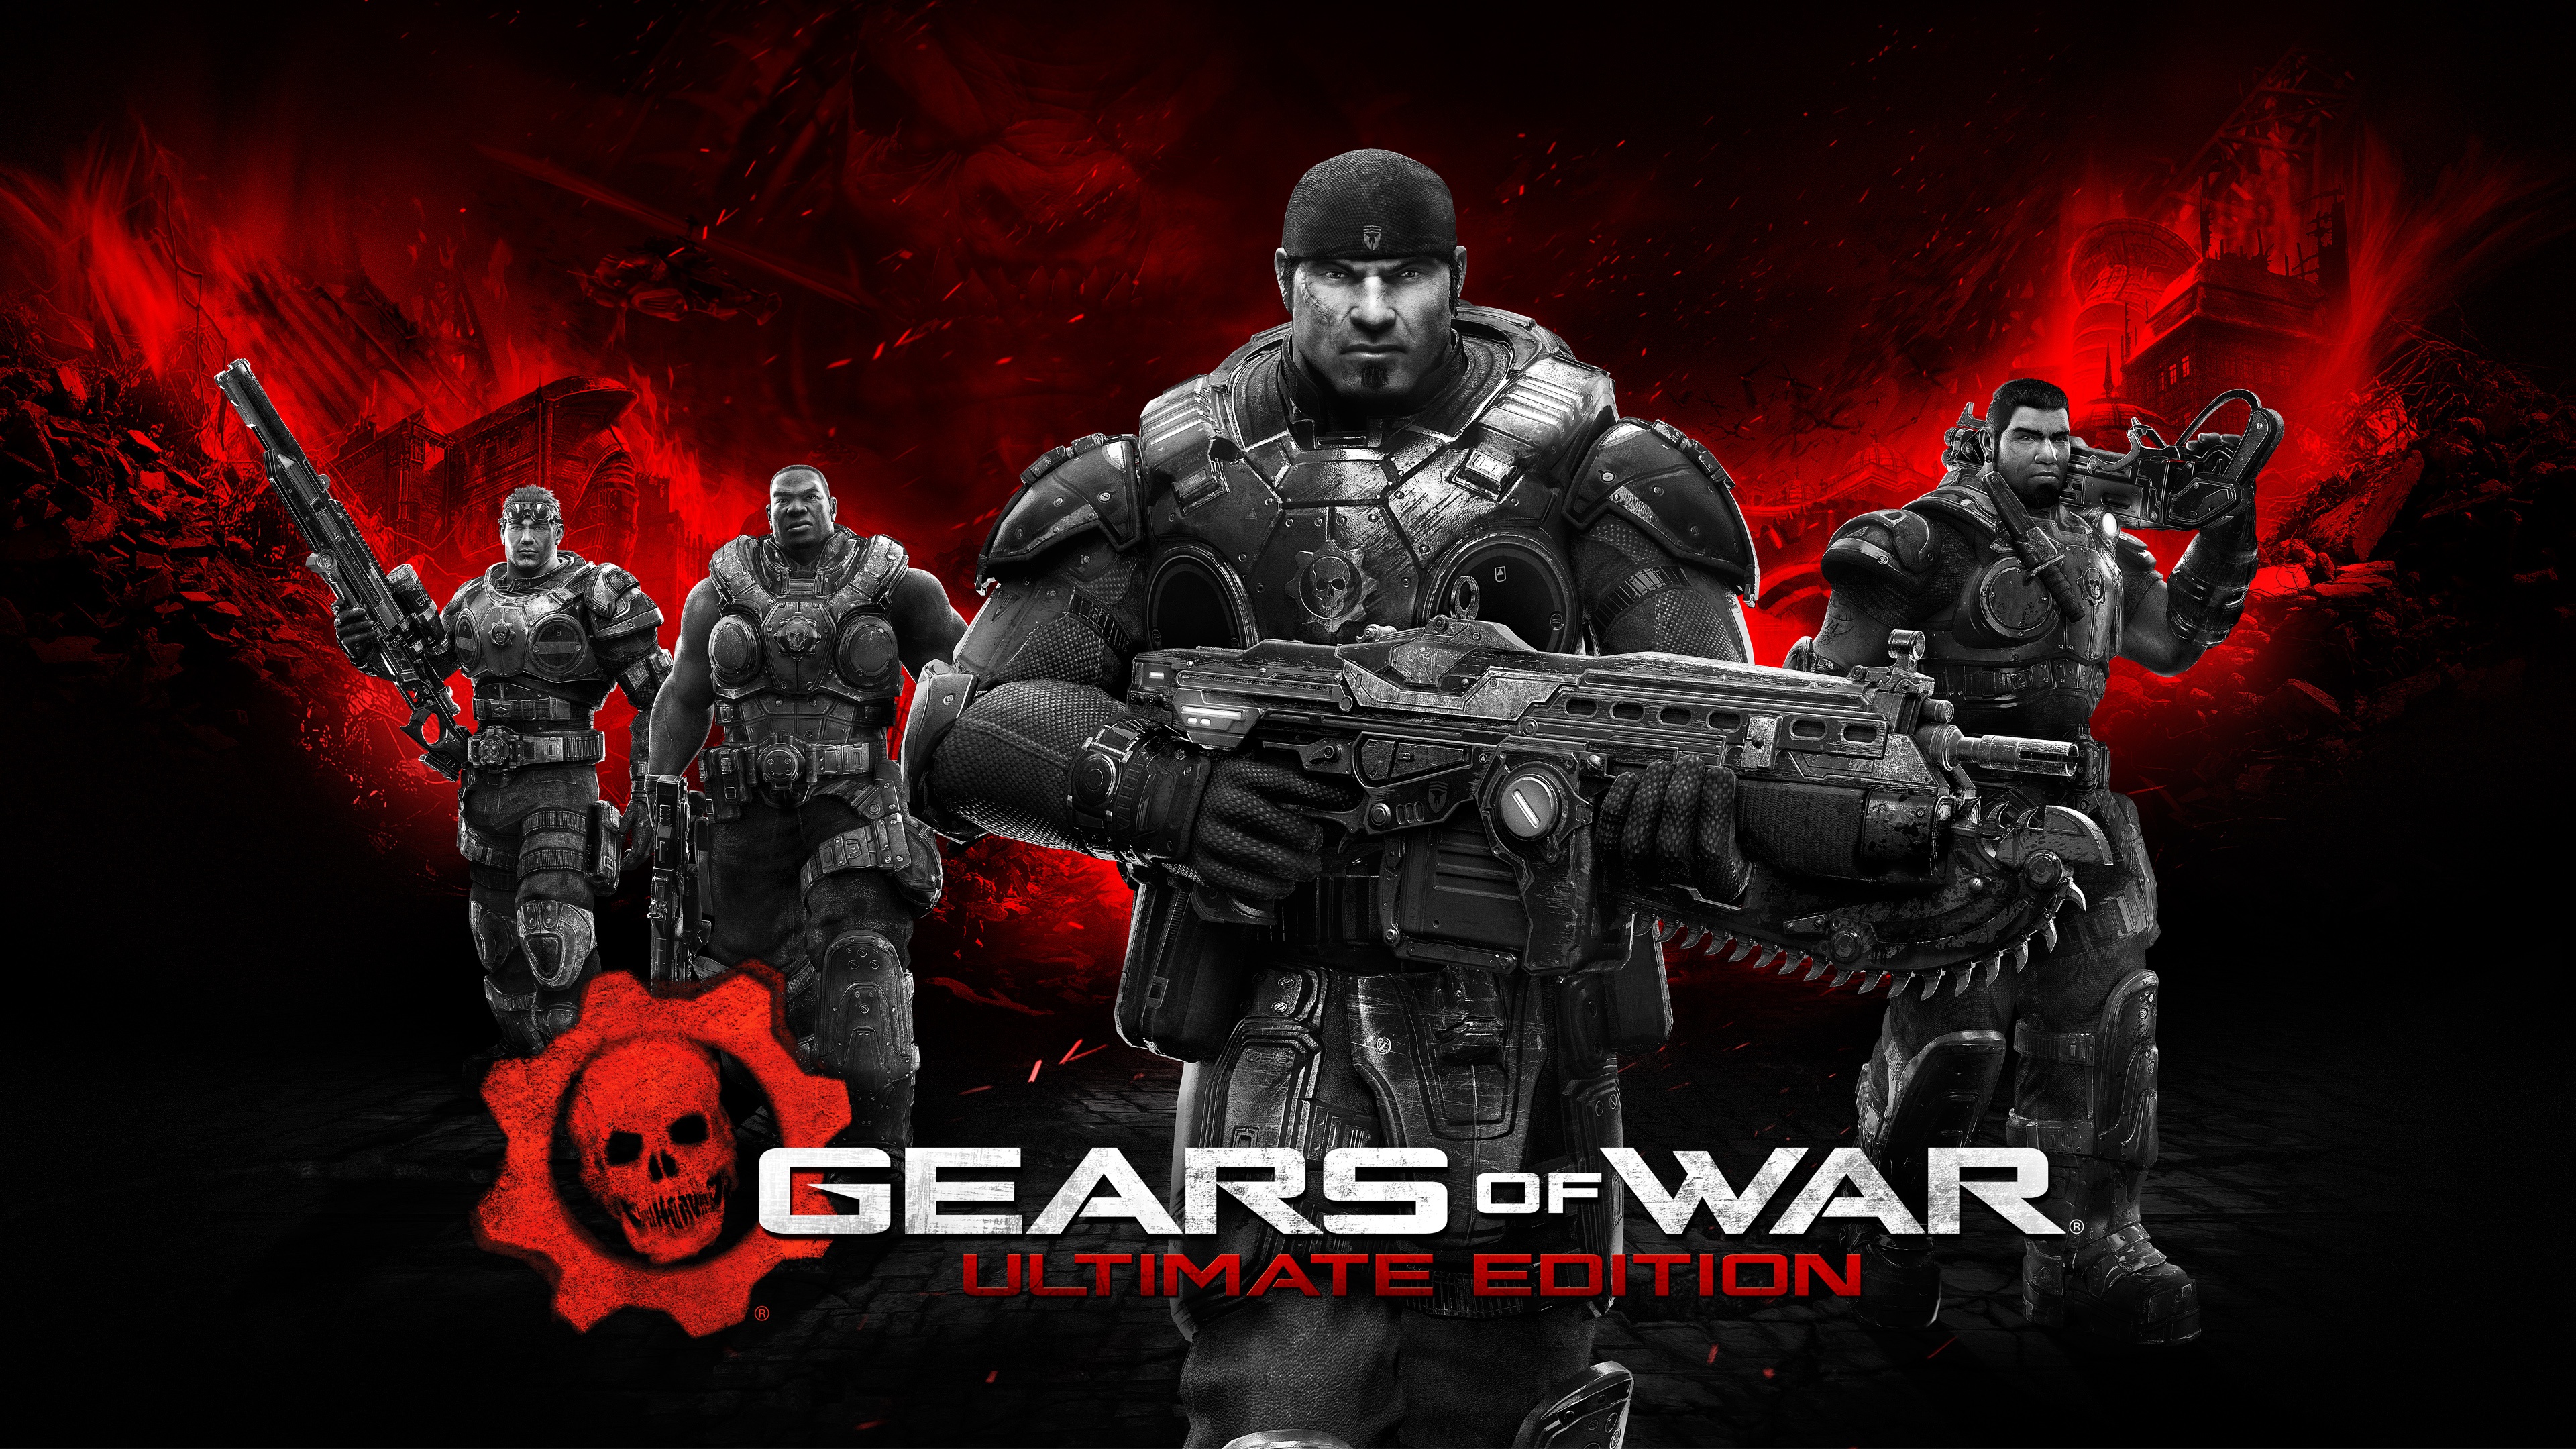 gears of war ultimate edition 3840 x 2160 32